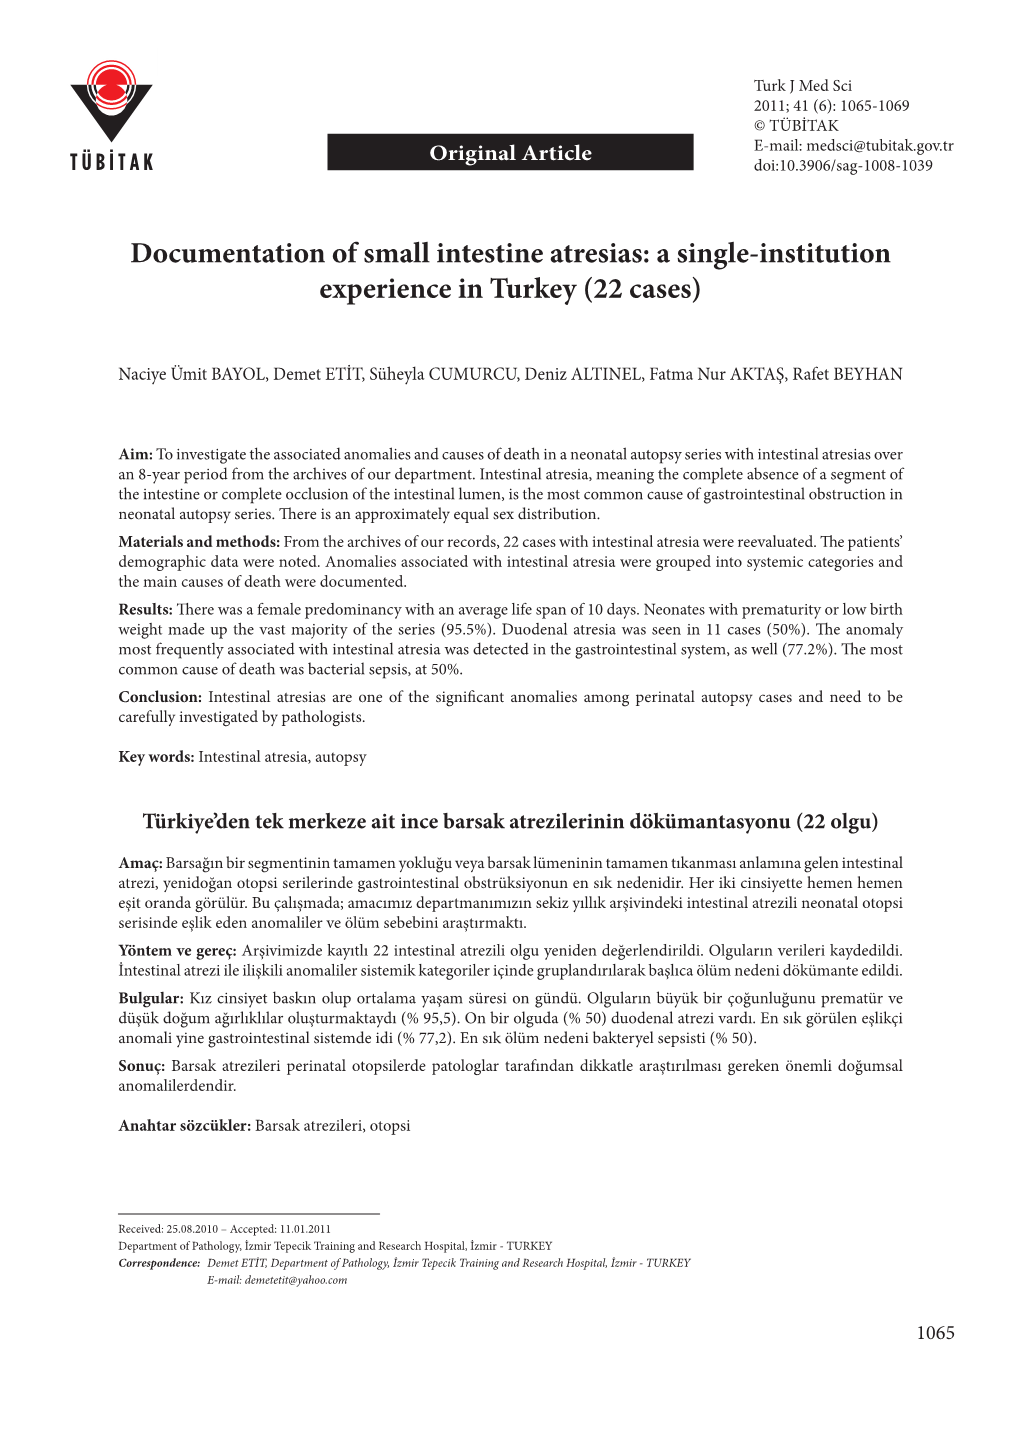 Documentation of Small Intestine Atresias: a Single-Institution Experience in Turkey (22 Cases)